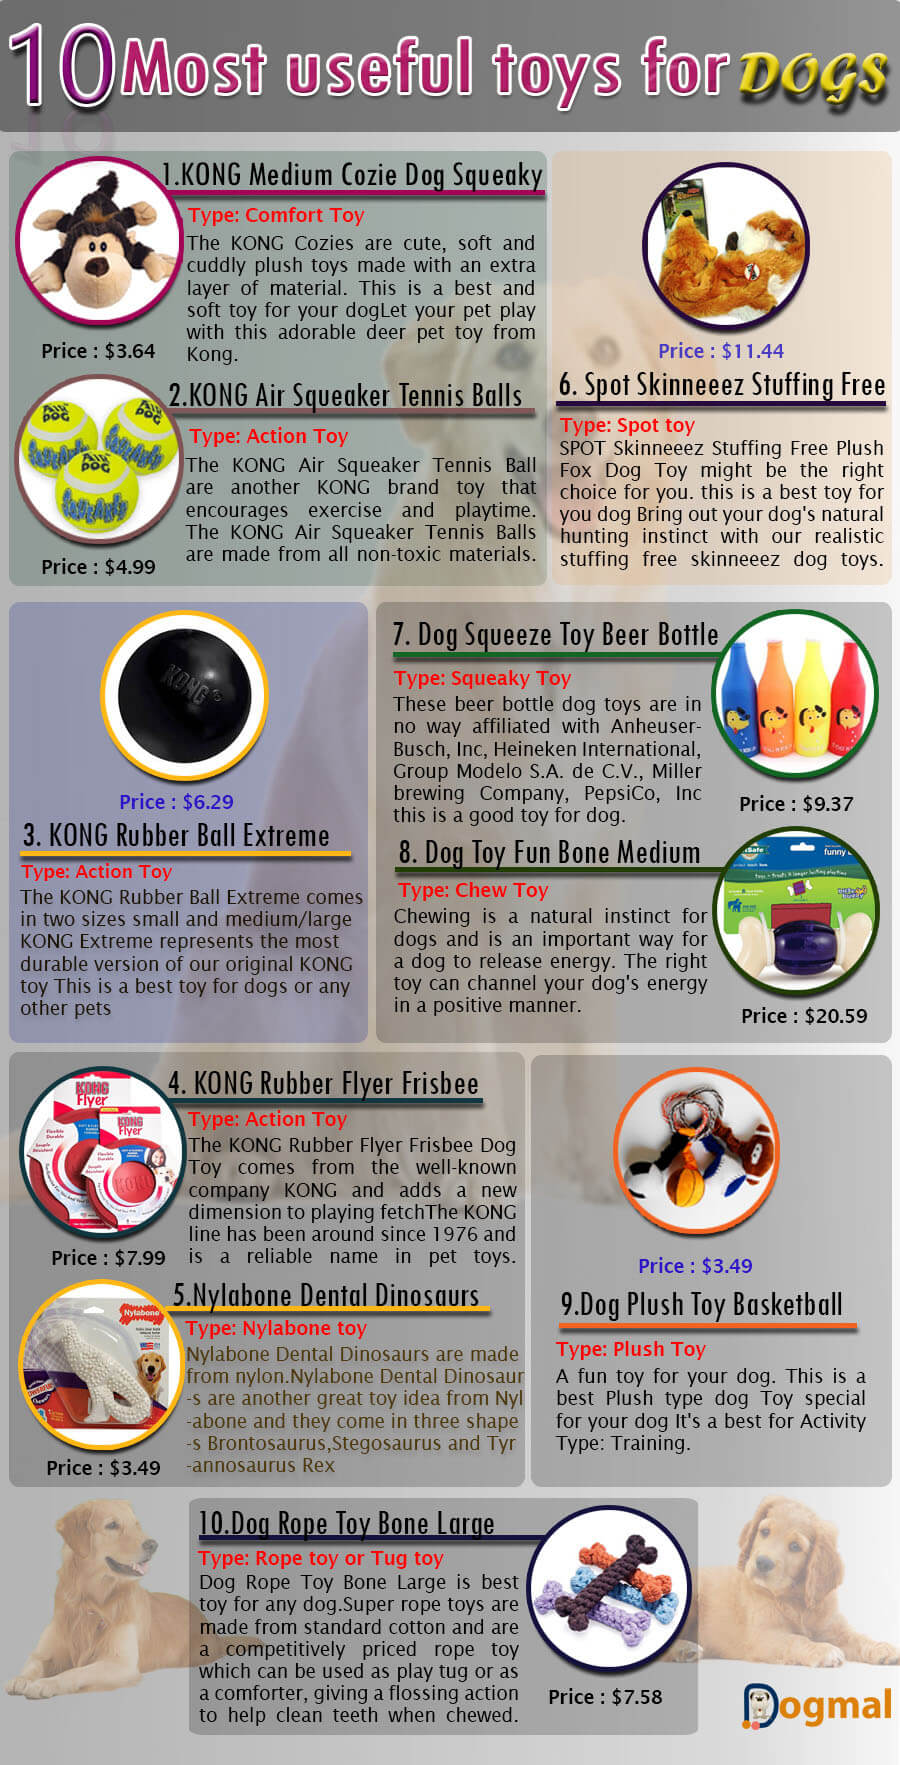 http://www.dogica.com/training-dog/guide/10-most-useful-toys-for-dog-infografic.jpg